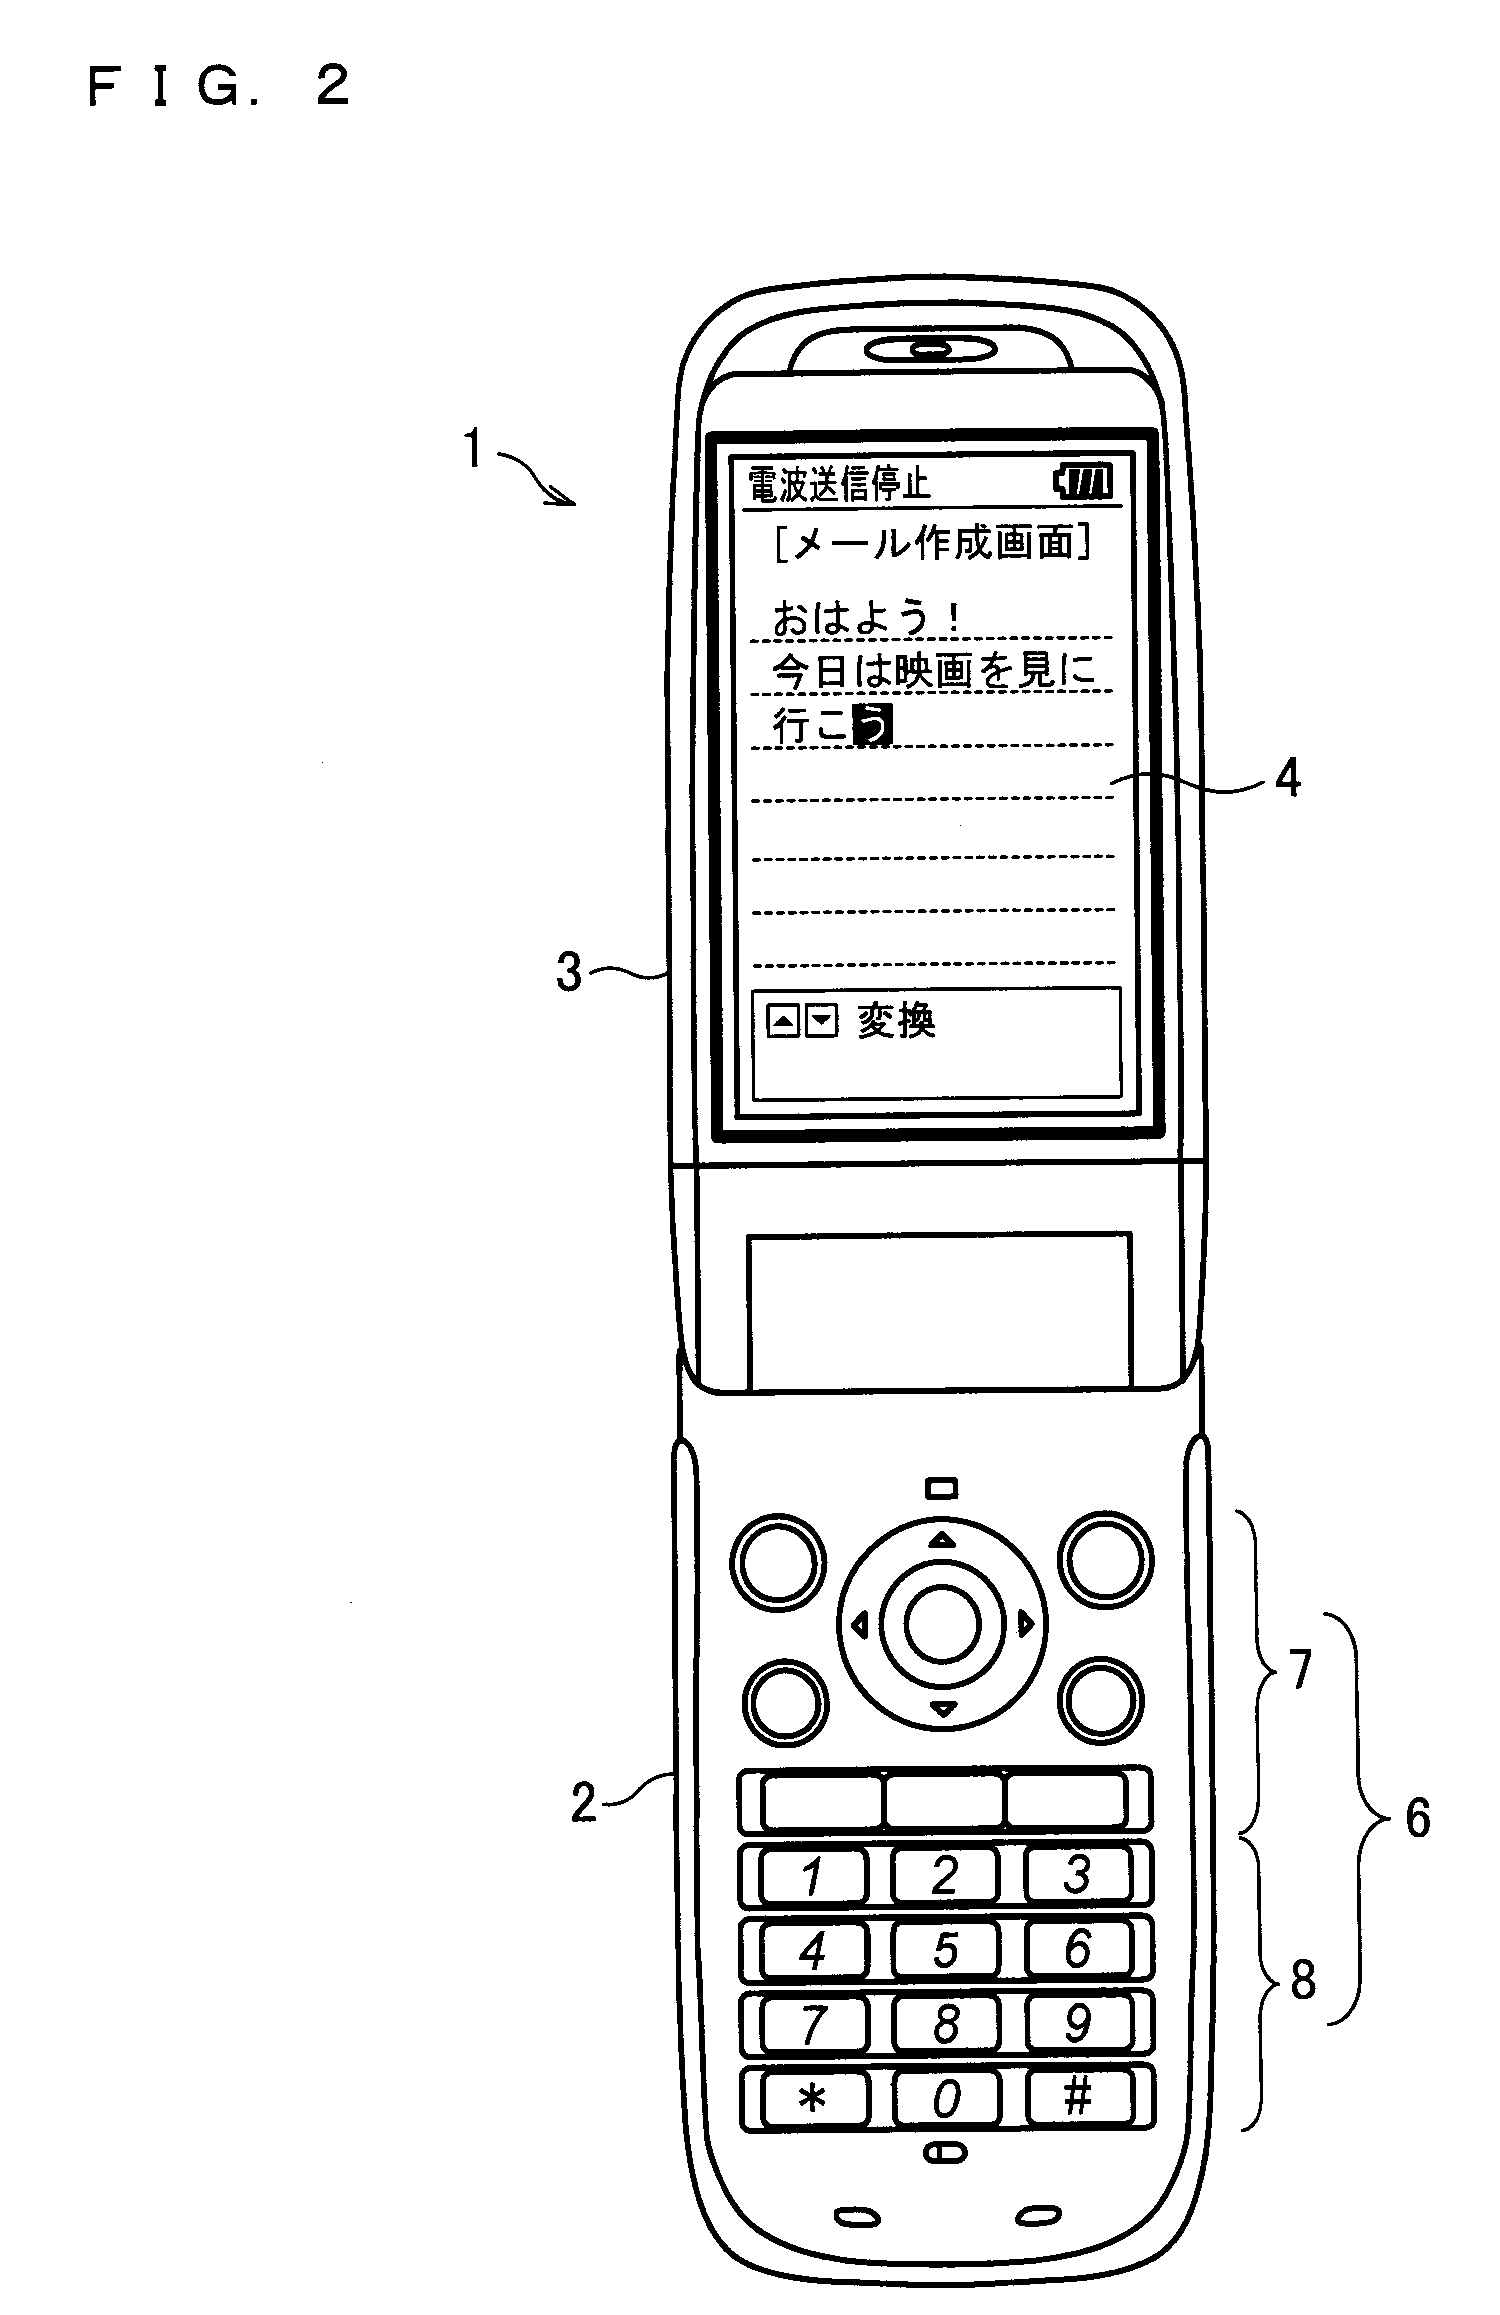 Display device, viewing angle control device, and electronic apparatus